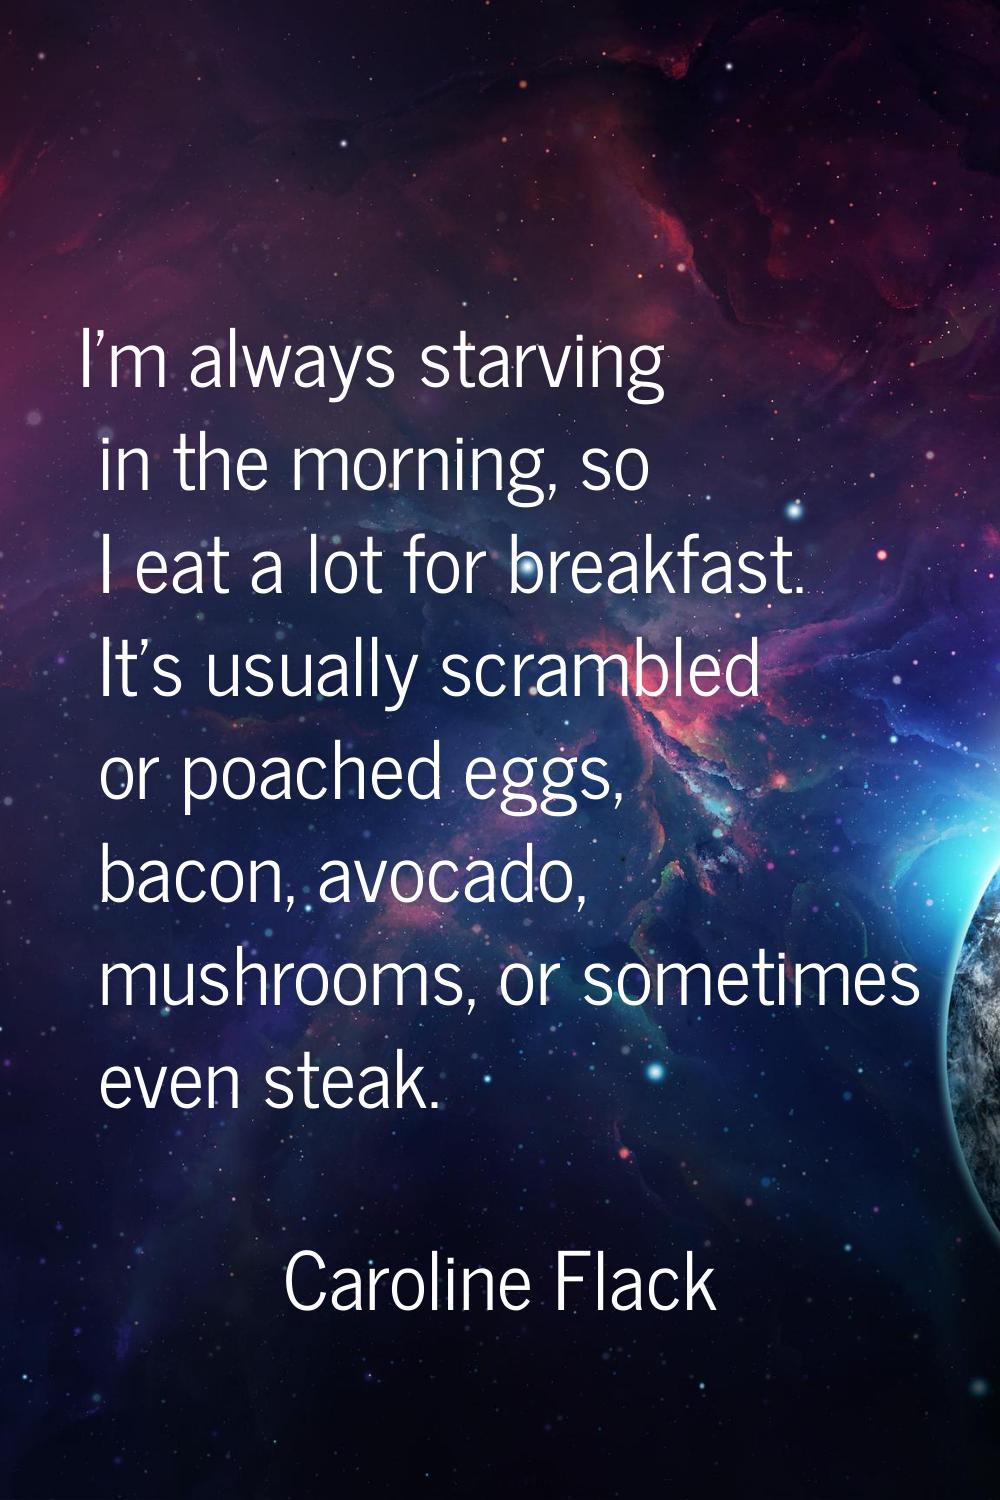 I'm always starving in the morning, so I eat a lot for breakfast. It's usually scrambled or poached